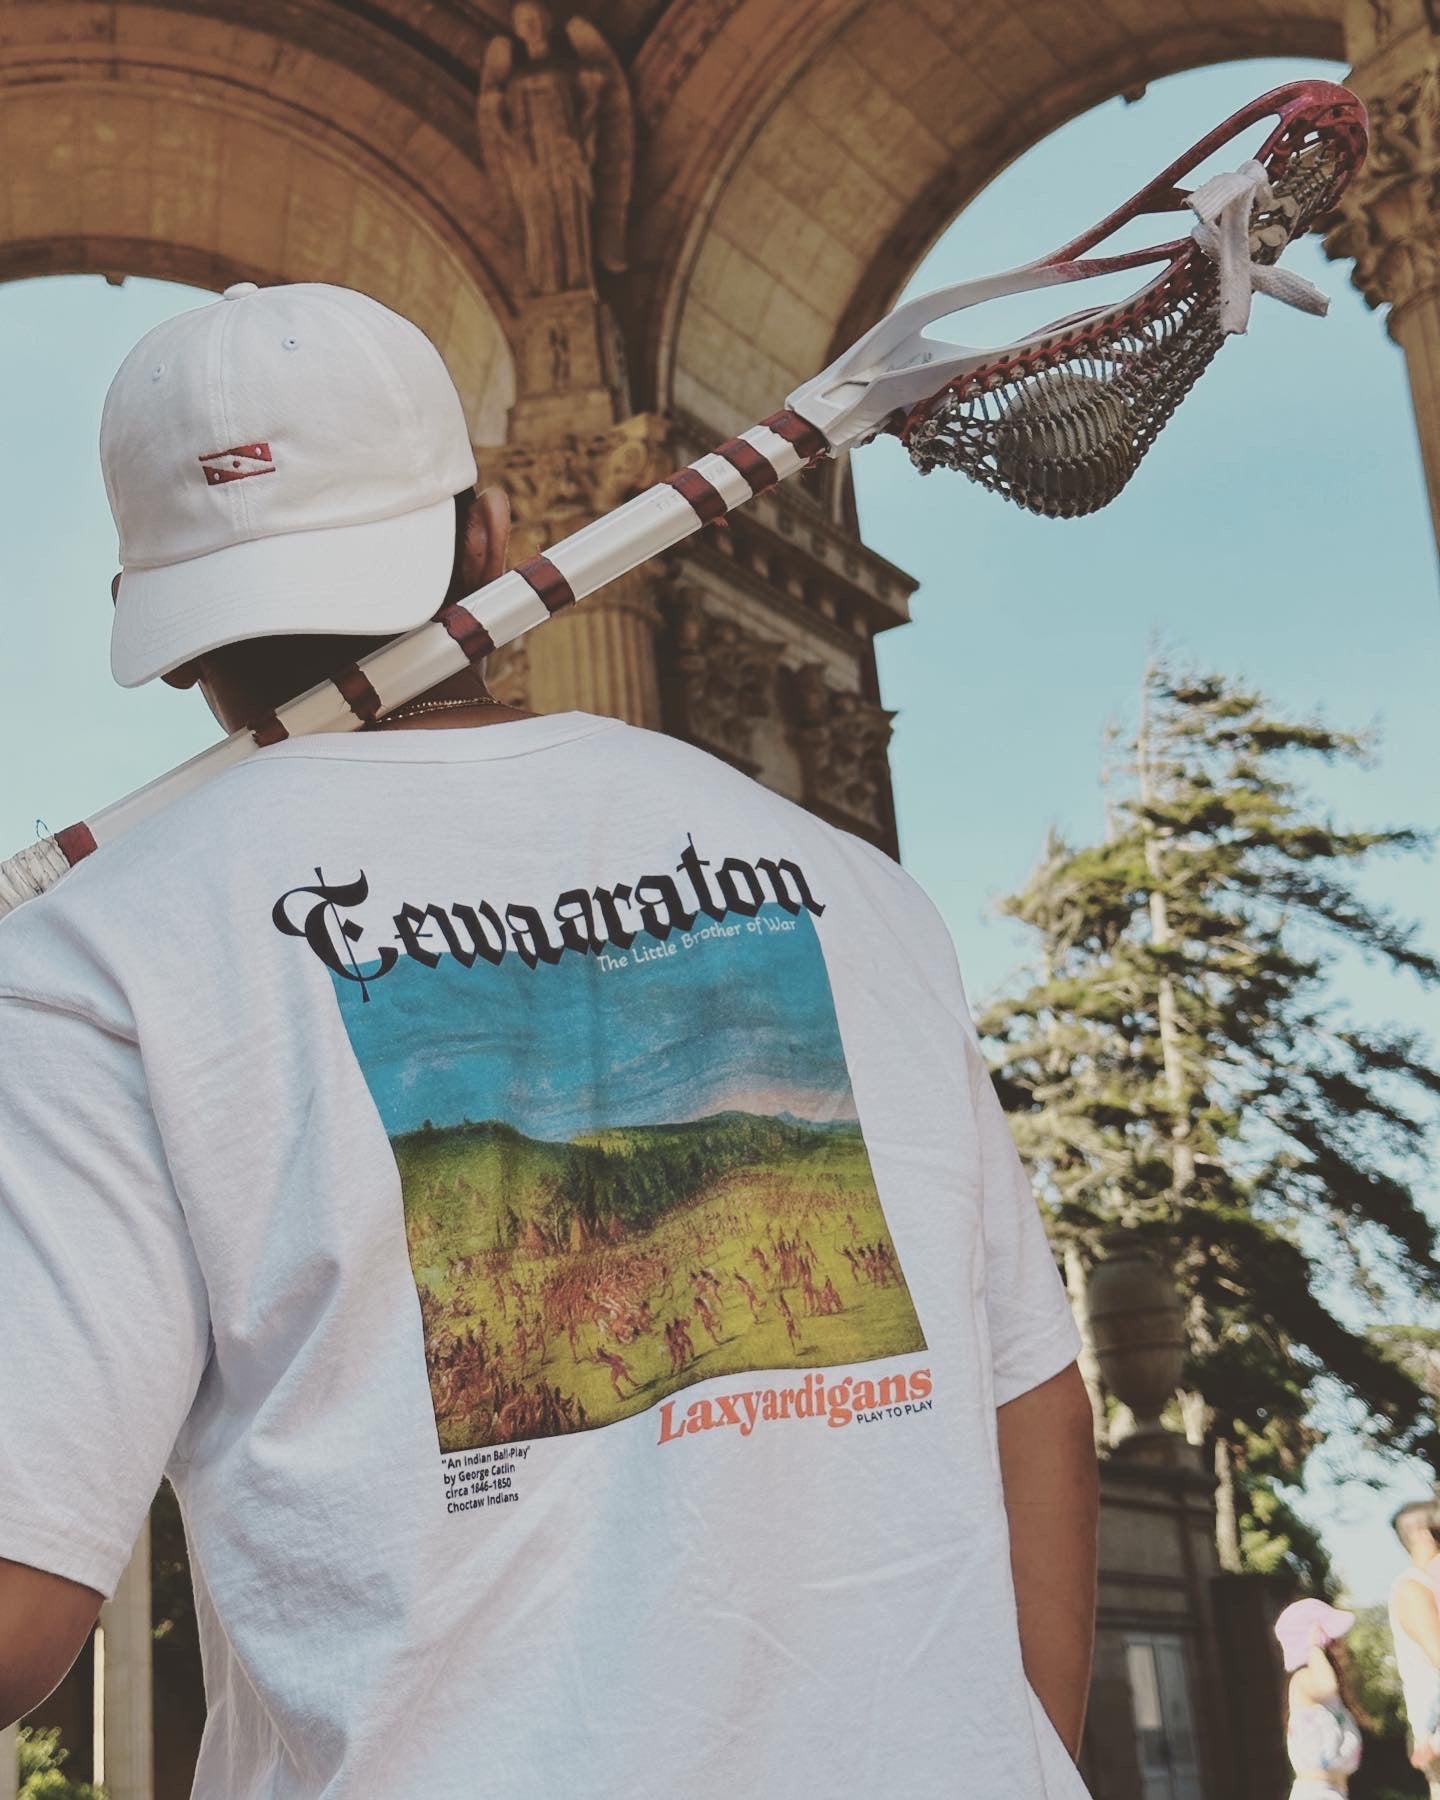 Man wears a hat and shirt by streetwear brand, Laxyardigans, while holding a lacrosse stick, at the Palace of Fine Arts in San Francisco